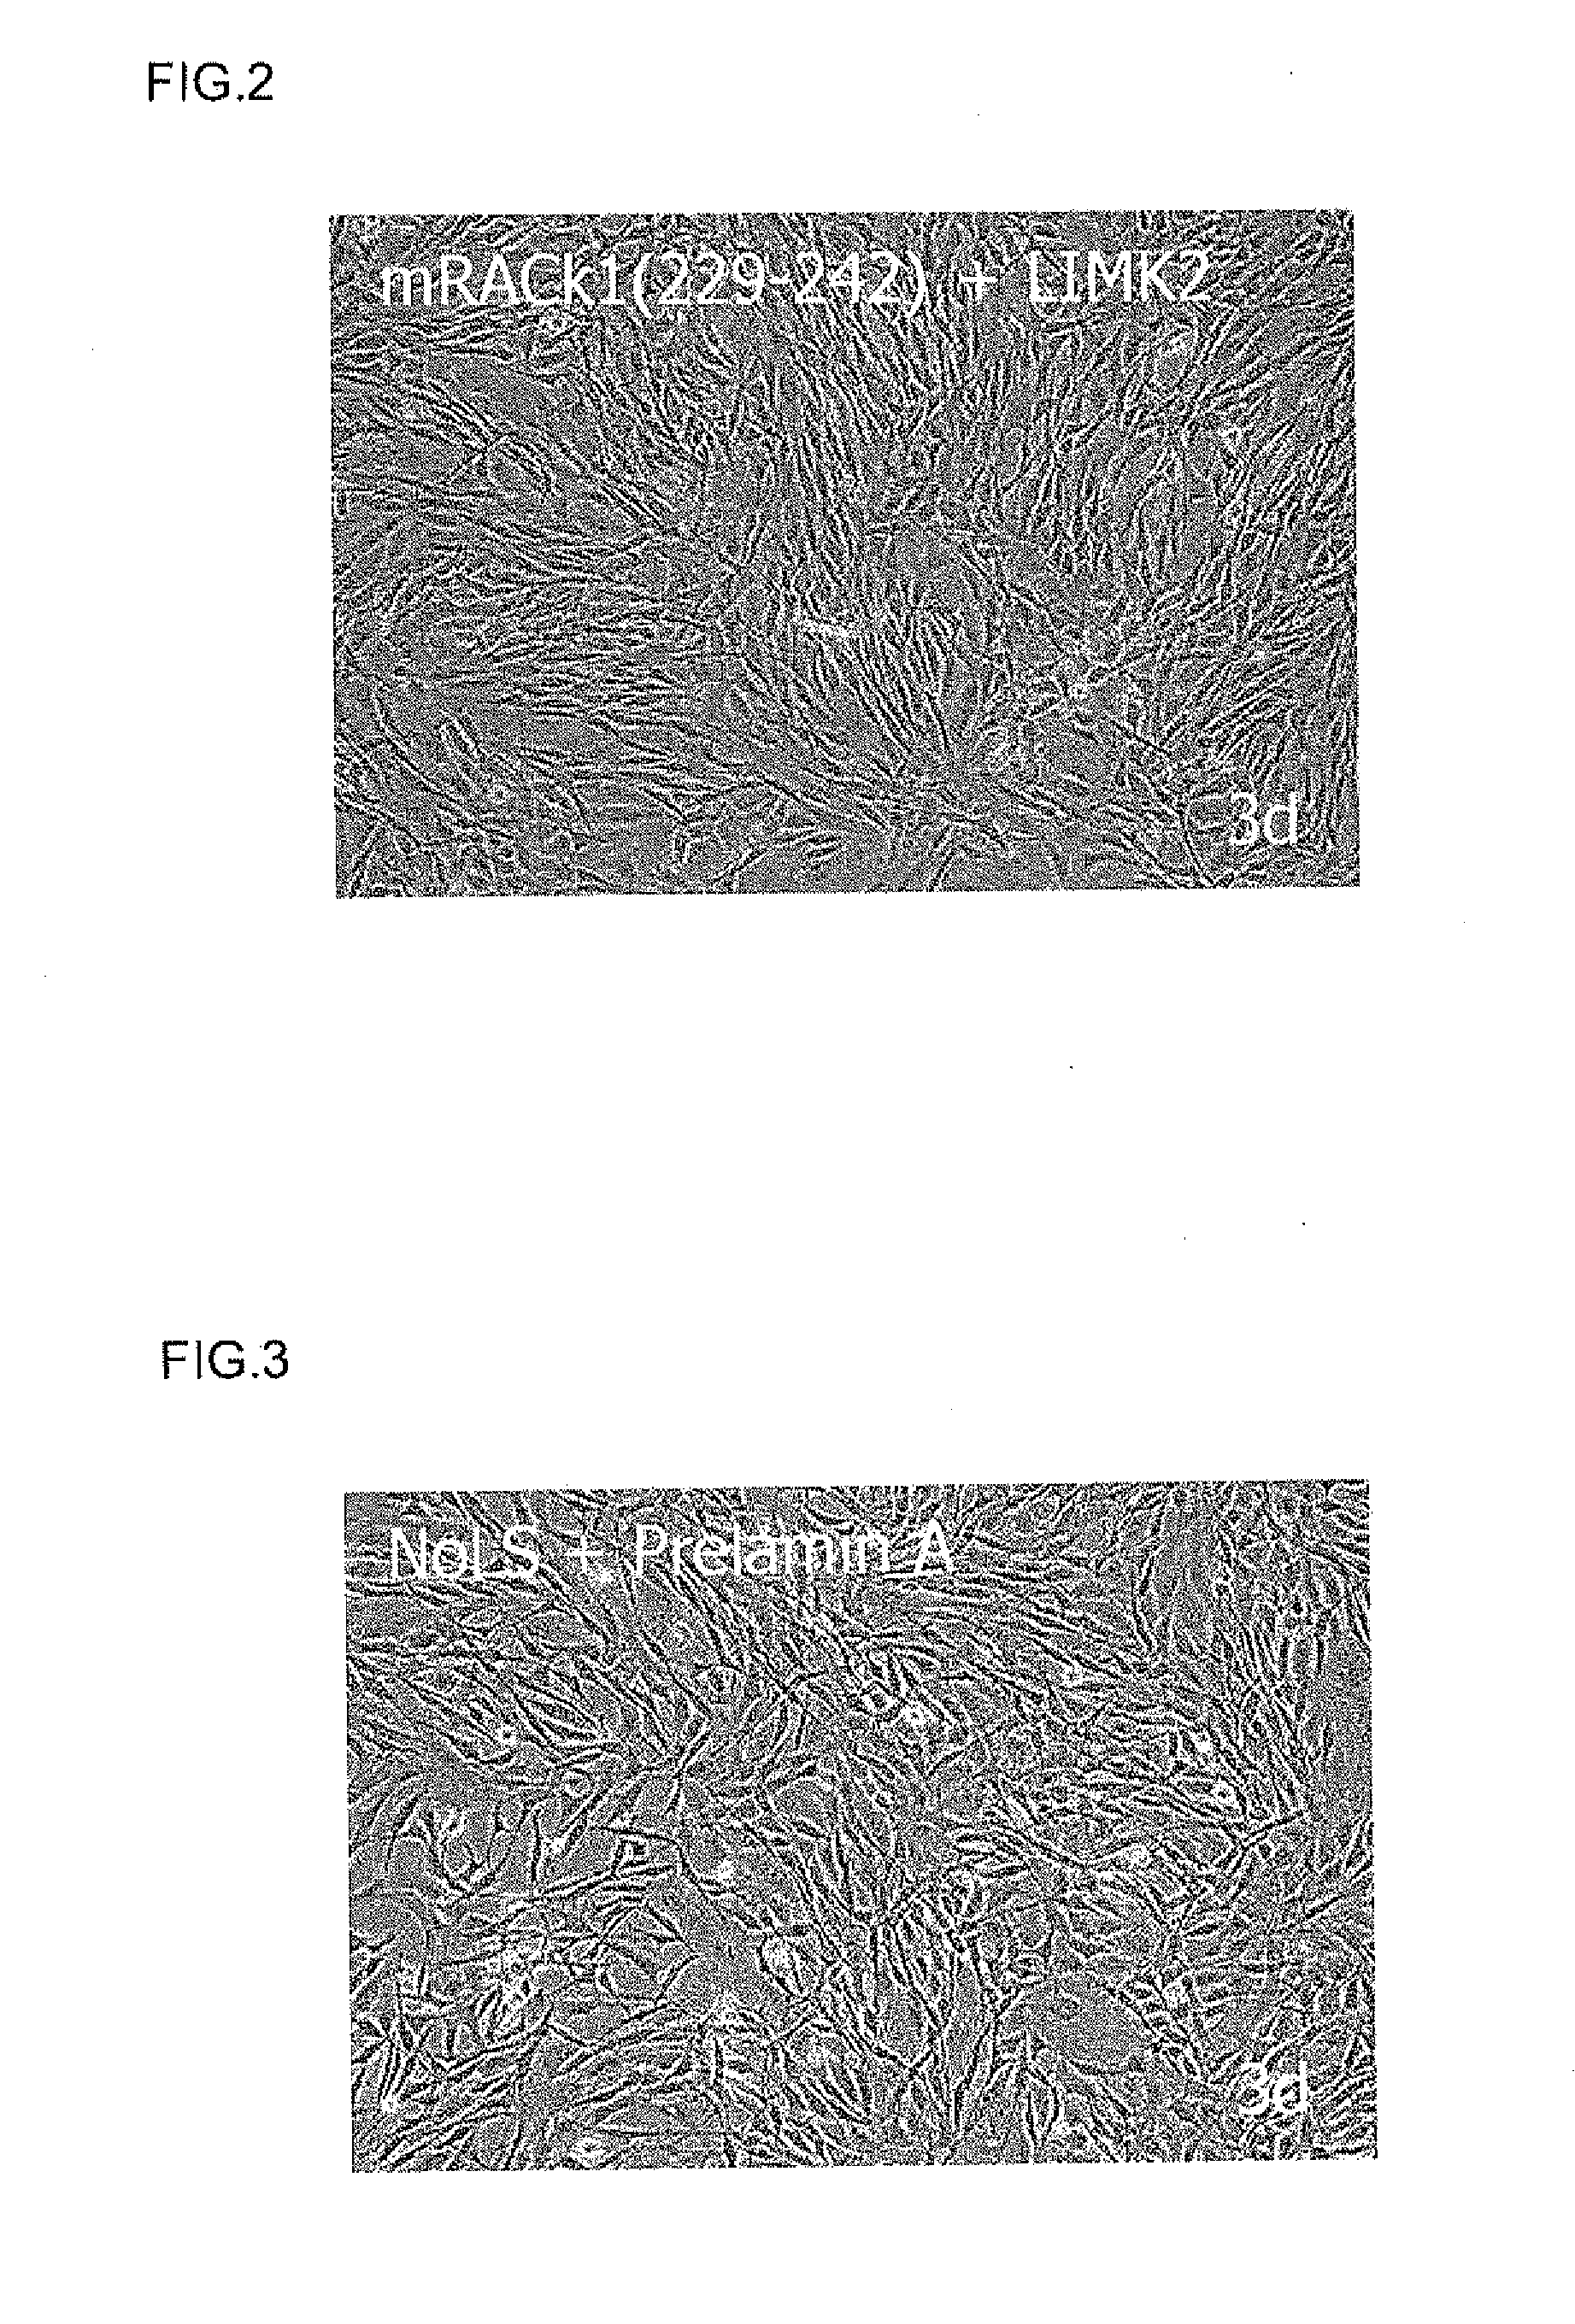 Cell proliferation-promoting peptide and use thereof